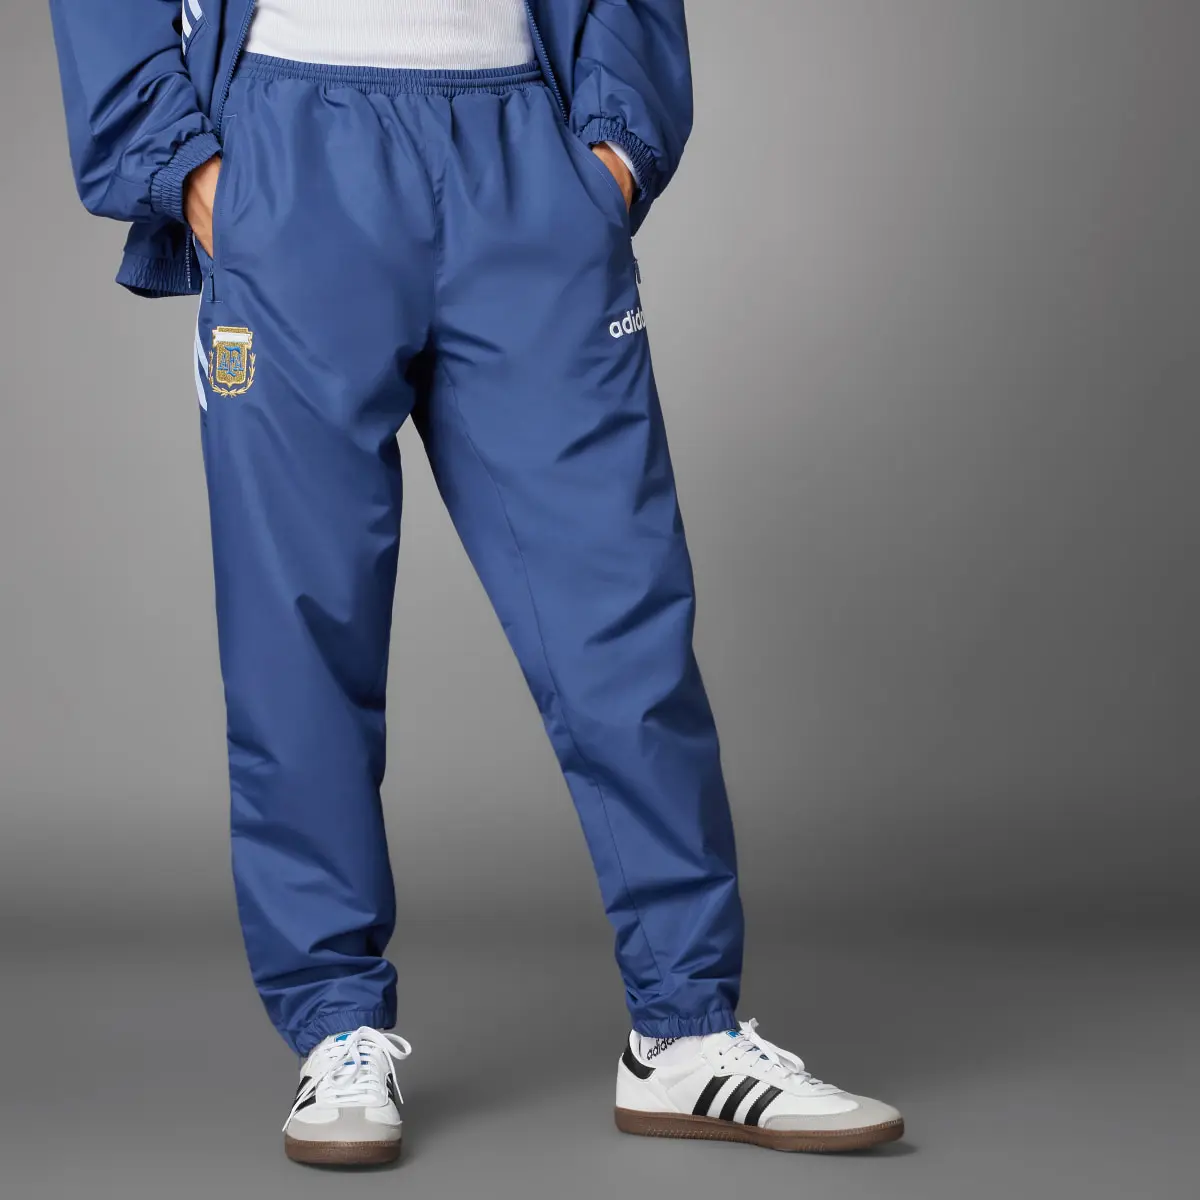 Adidas Argentina 1994 Woven Track Pants. 1